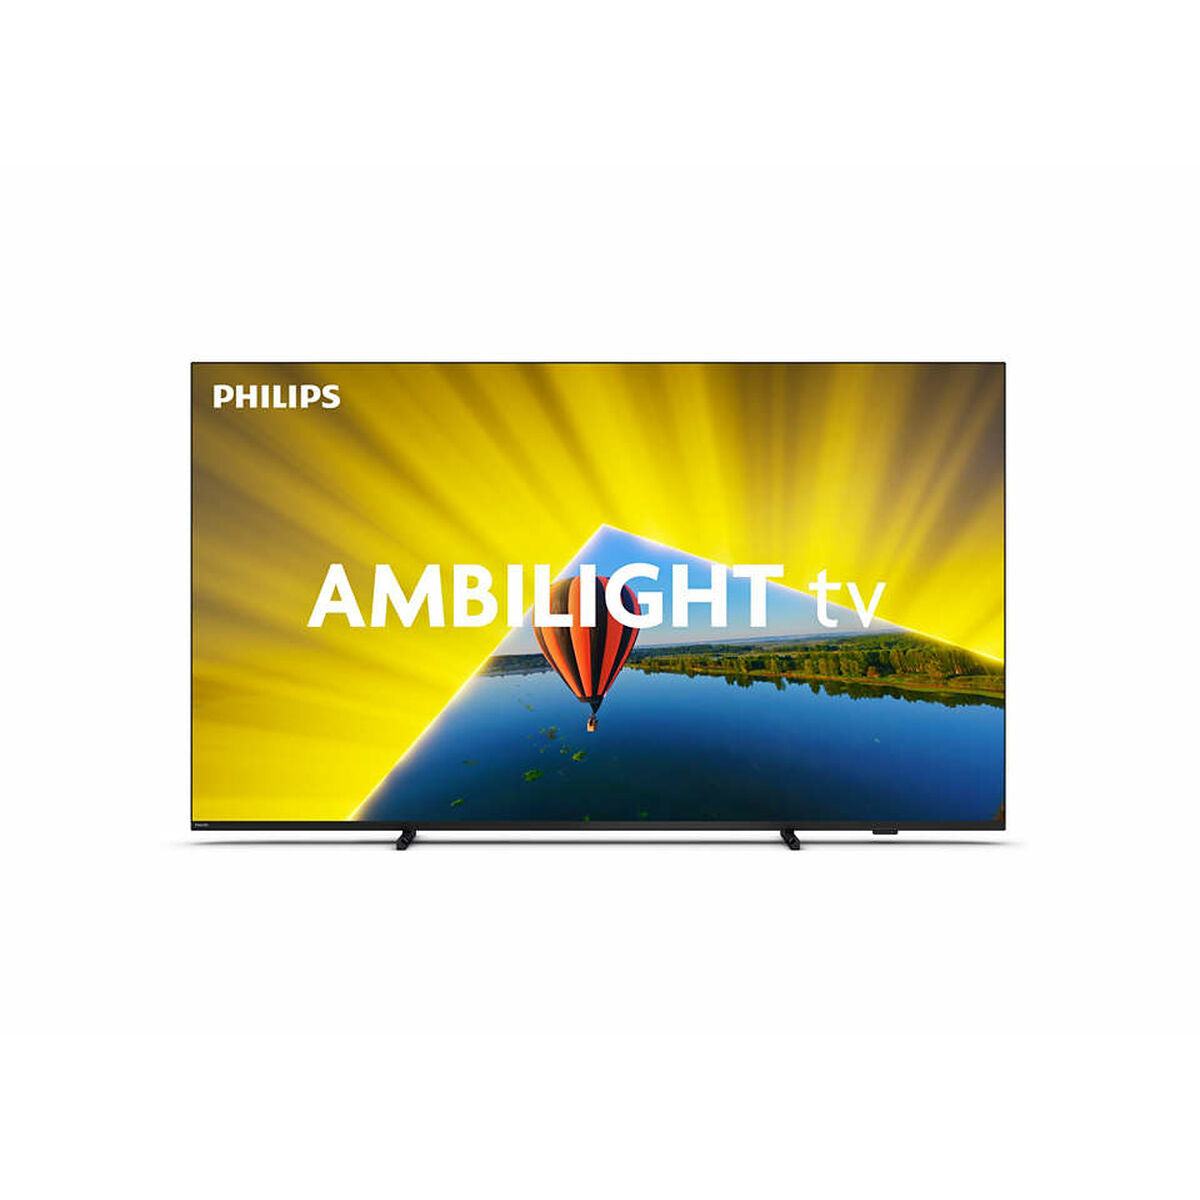 Smart TV Philips 75PUS8079 4K Ultra HD 75" LED HDR, Philips, Electronics, TV, Video and home cinema, smart-tv-philips-75pus8079-4k-ultra-hd-75-led-hdr, Brand_Philips, category-reference-2609, category-reference-2625, category-reference-2931, category-reference-t-18805, category-reference-t-18827, category-reference-t-19653, cinema and television, Condition_NEW, entertainment, Price_+ 1000, RiotNook